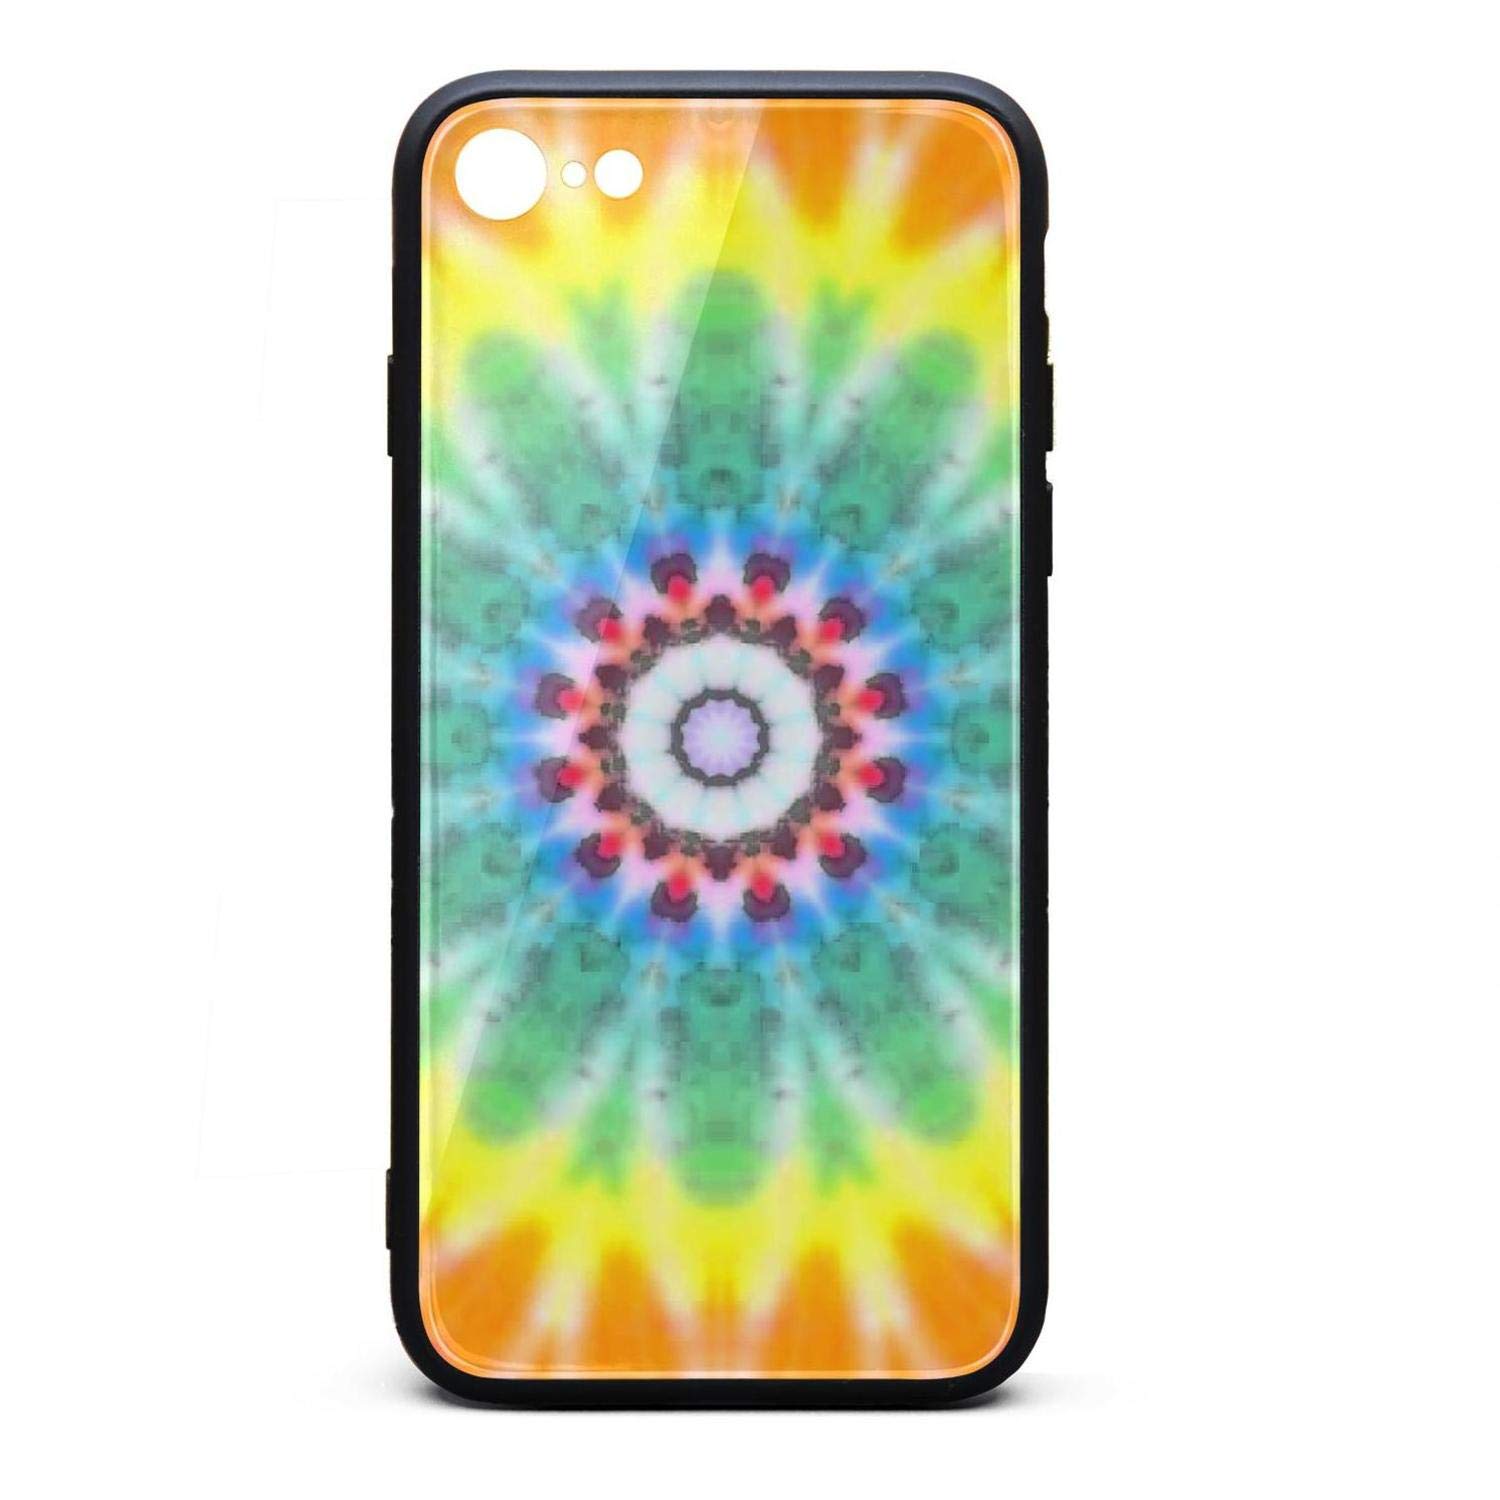 Iphone 6/6s Case - Tie Dye Cover Photos For Facebook , HD Wallpaper & Backgrounds